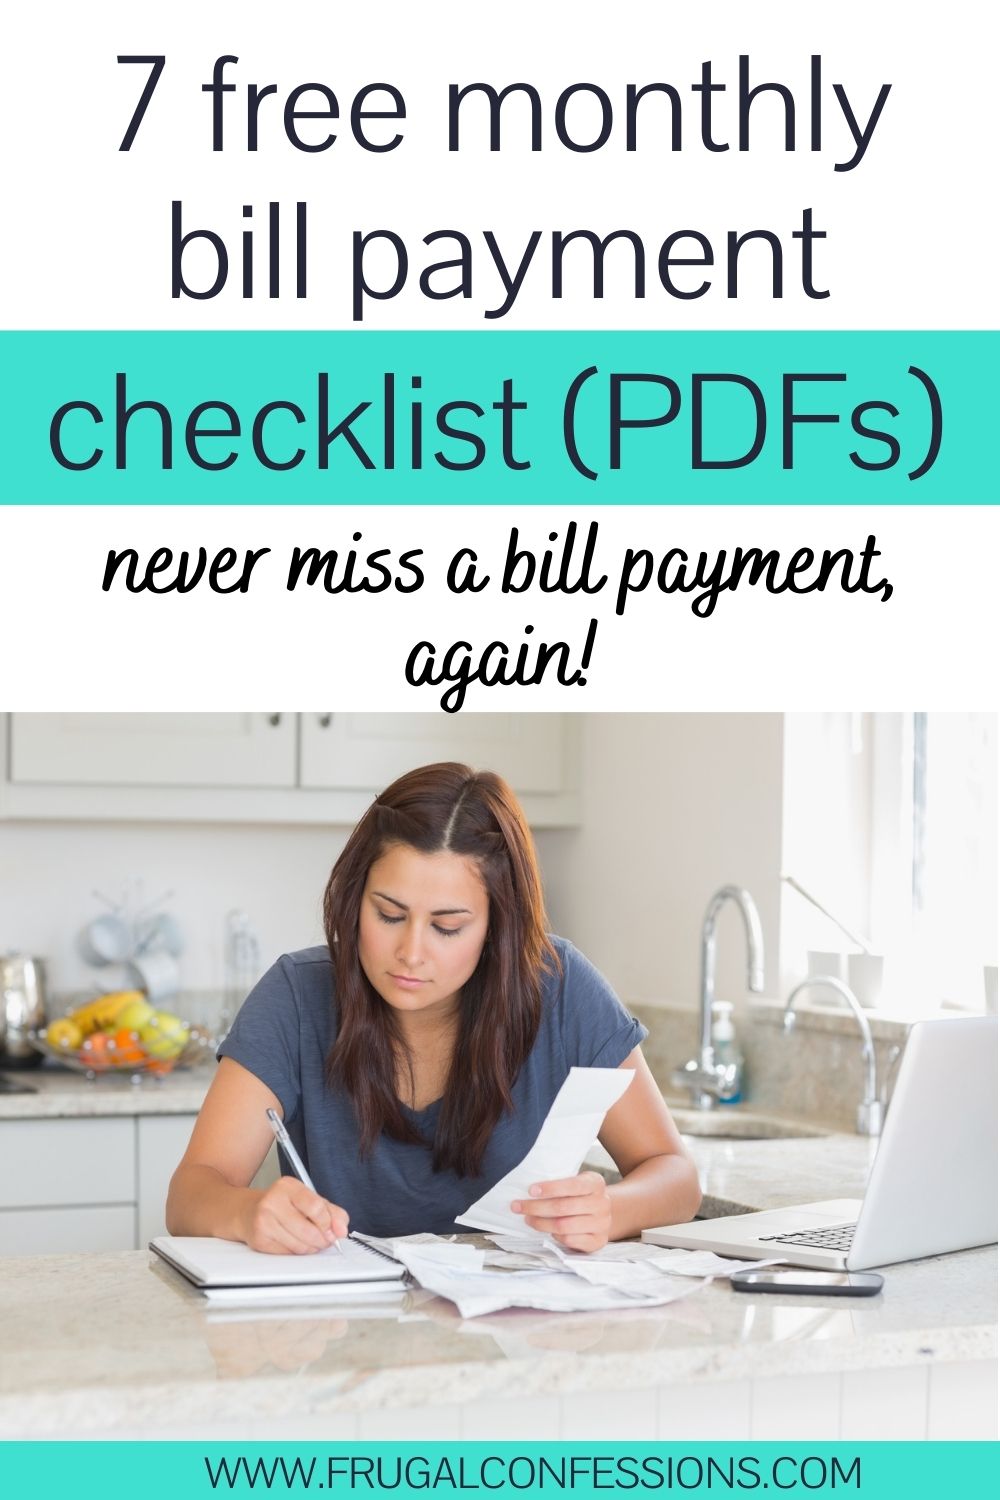 woman tracking bill payment at kitchen bar, text overlay "7 free monthly bill payment checklist PDF"